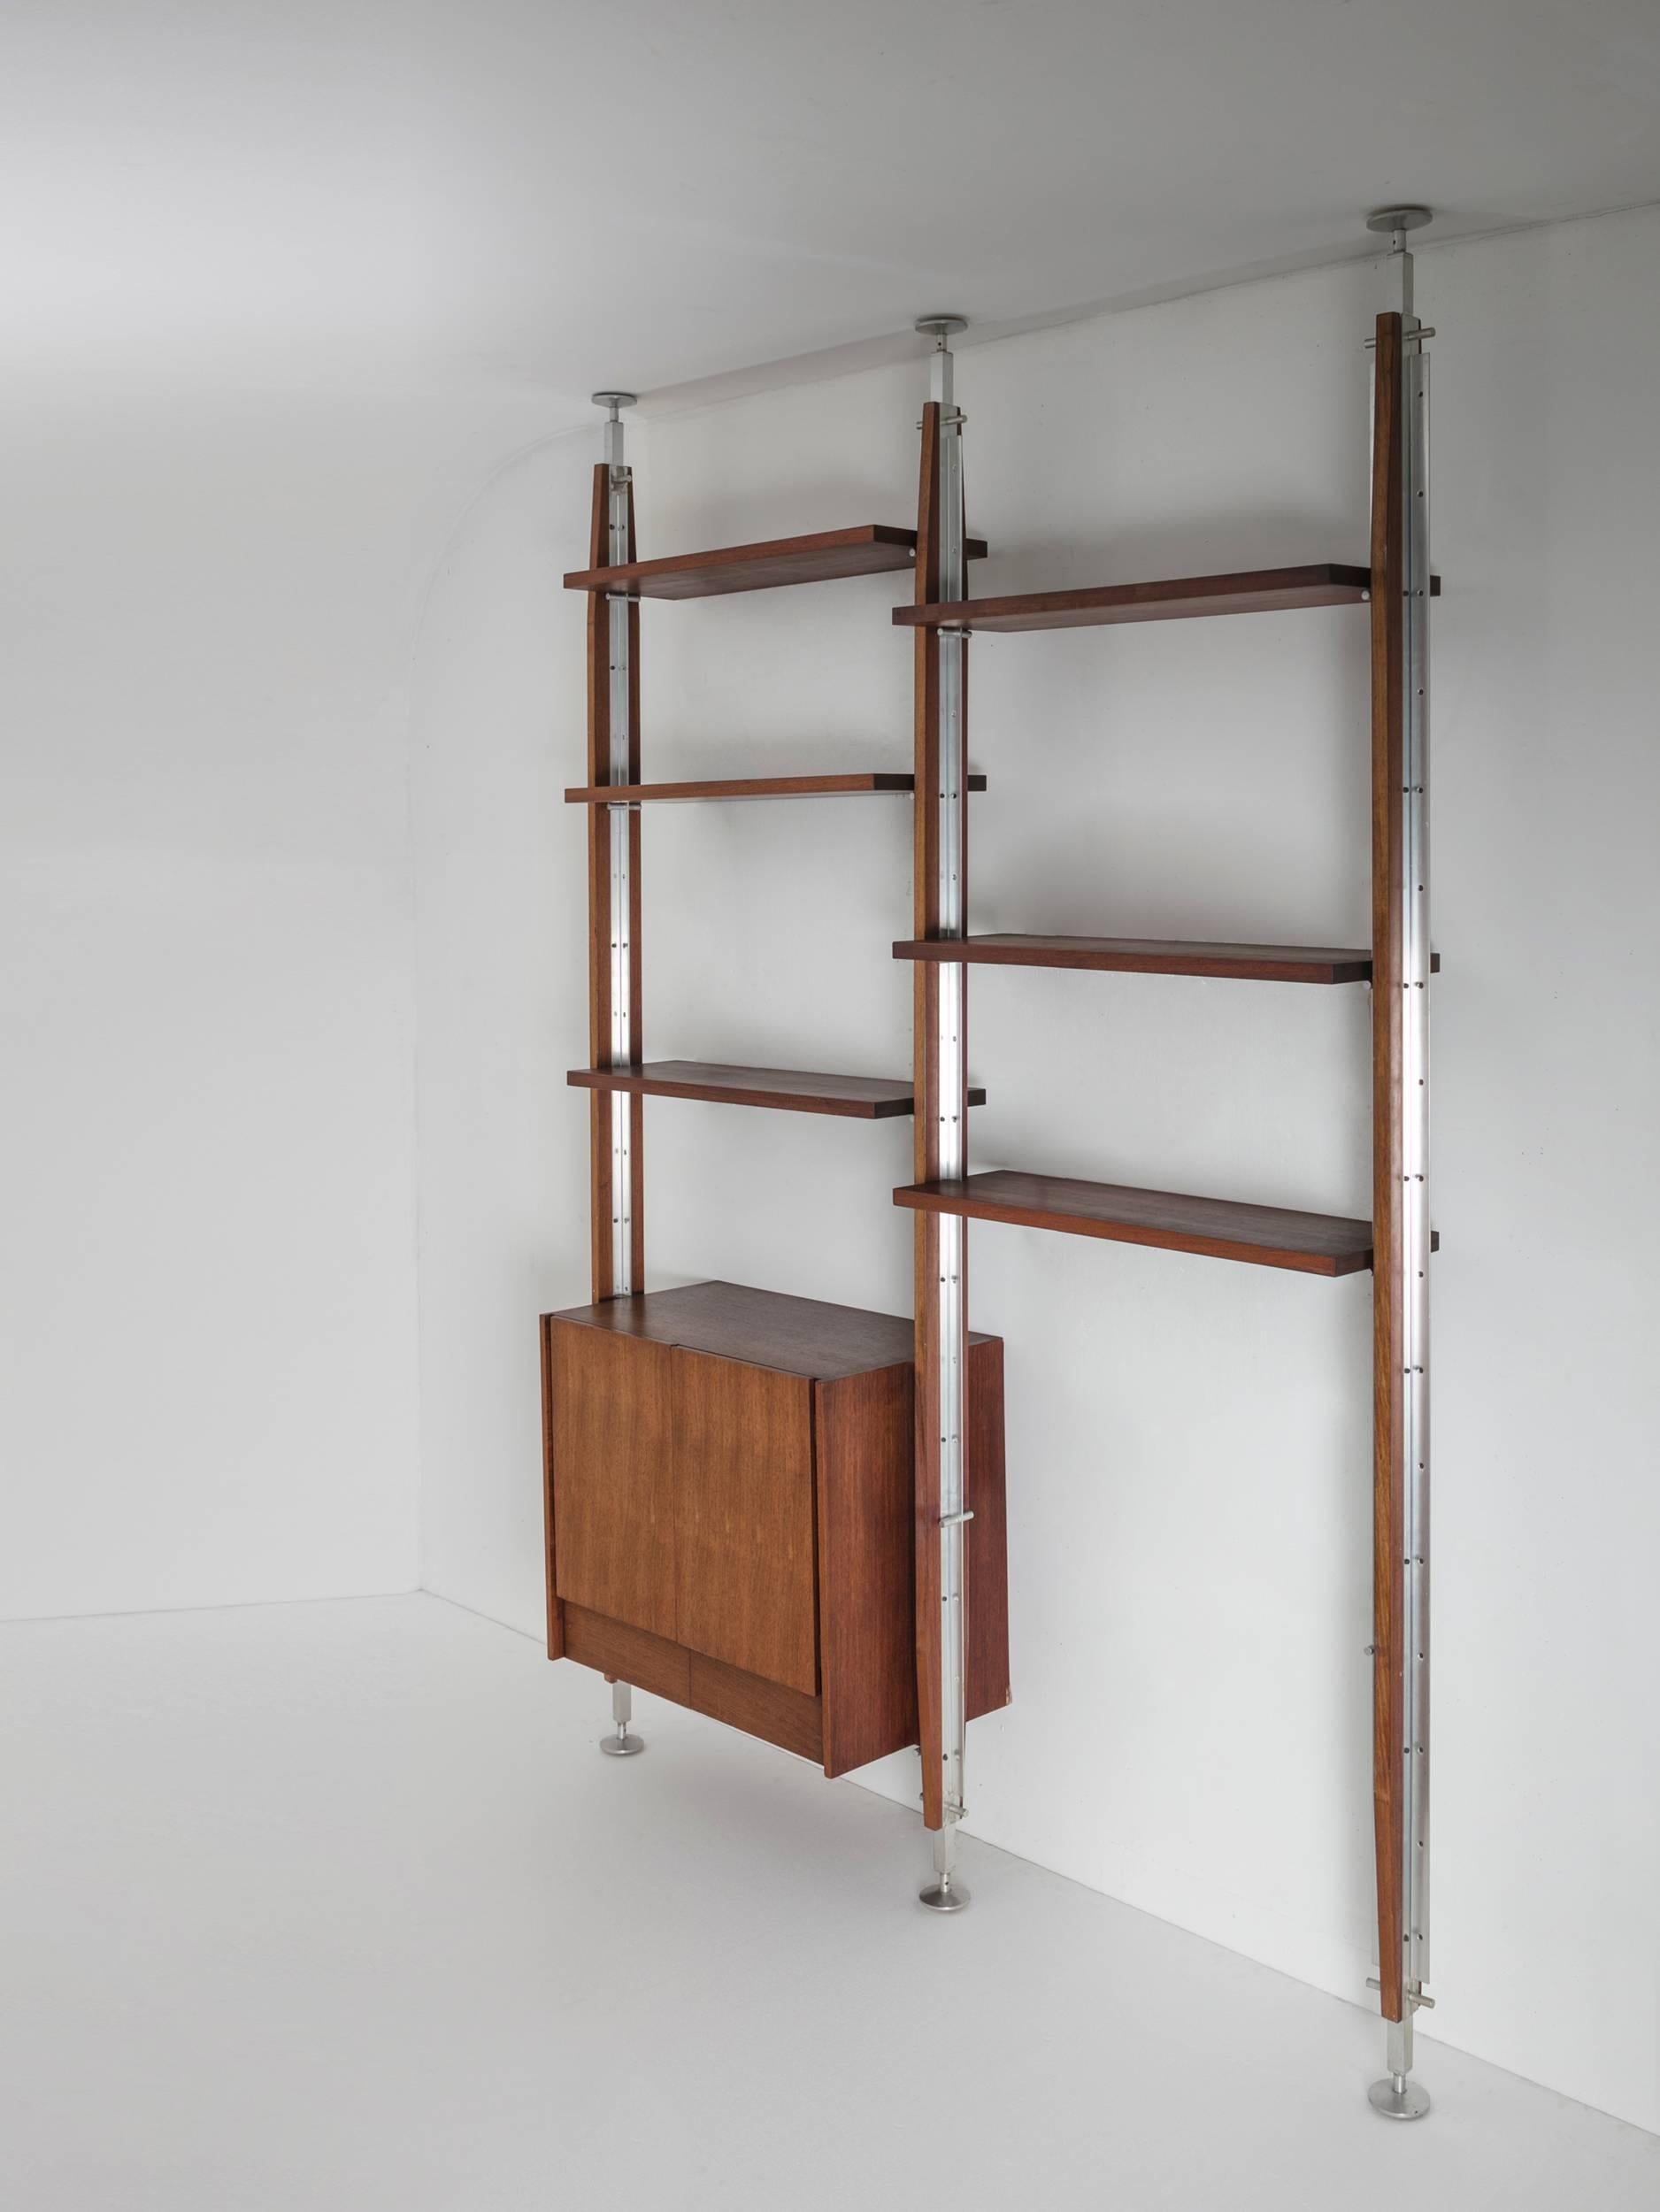 Remarkable bookcase with steel and wood frame.
Three uprights one cabinet and six shelves freely adjustable.
Connection between vertical and horizontal elements is perfectly solved with a cut on the shelf side.
 